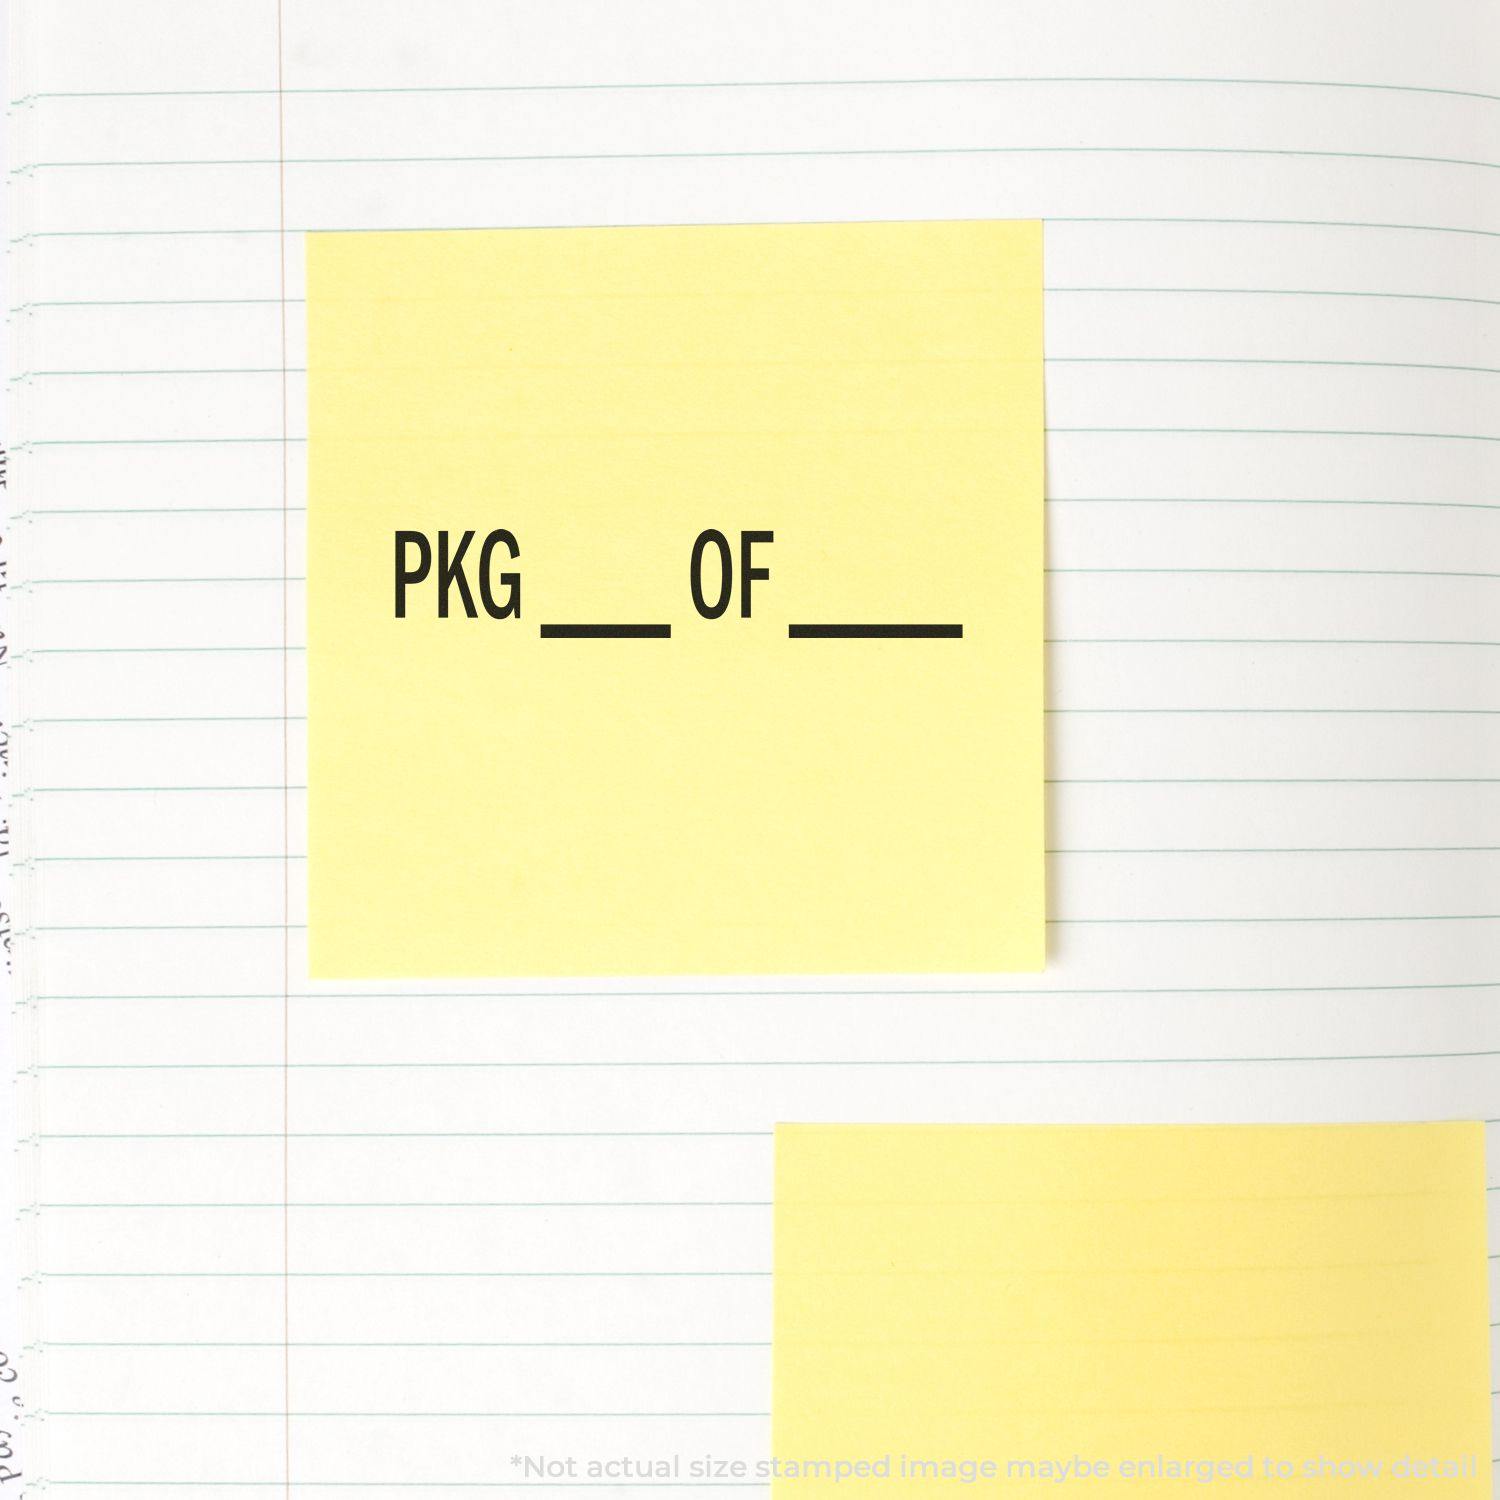 A stock office rubber stamp with a stamped image showing how the text "PKG ___ OF ____" in a large font is displayed after stamping.